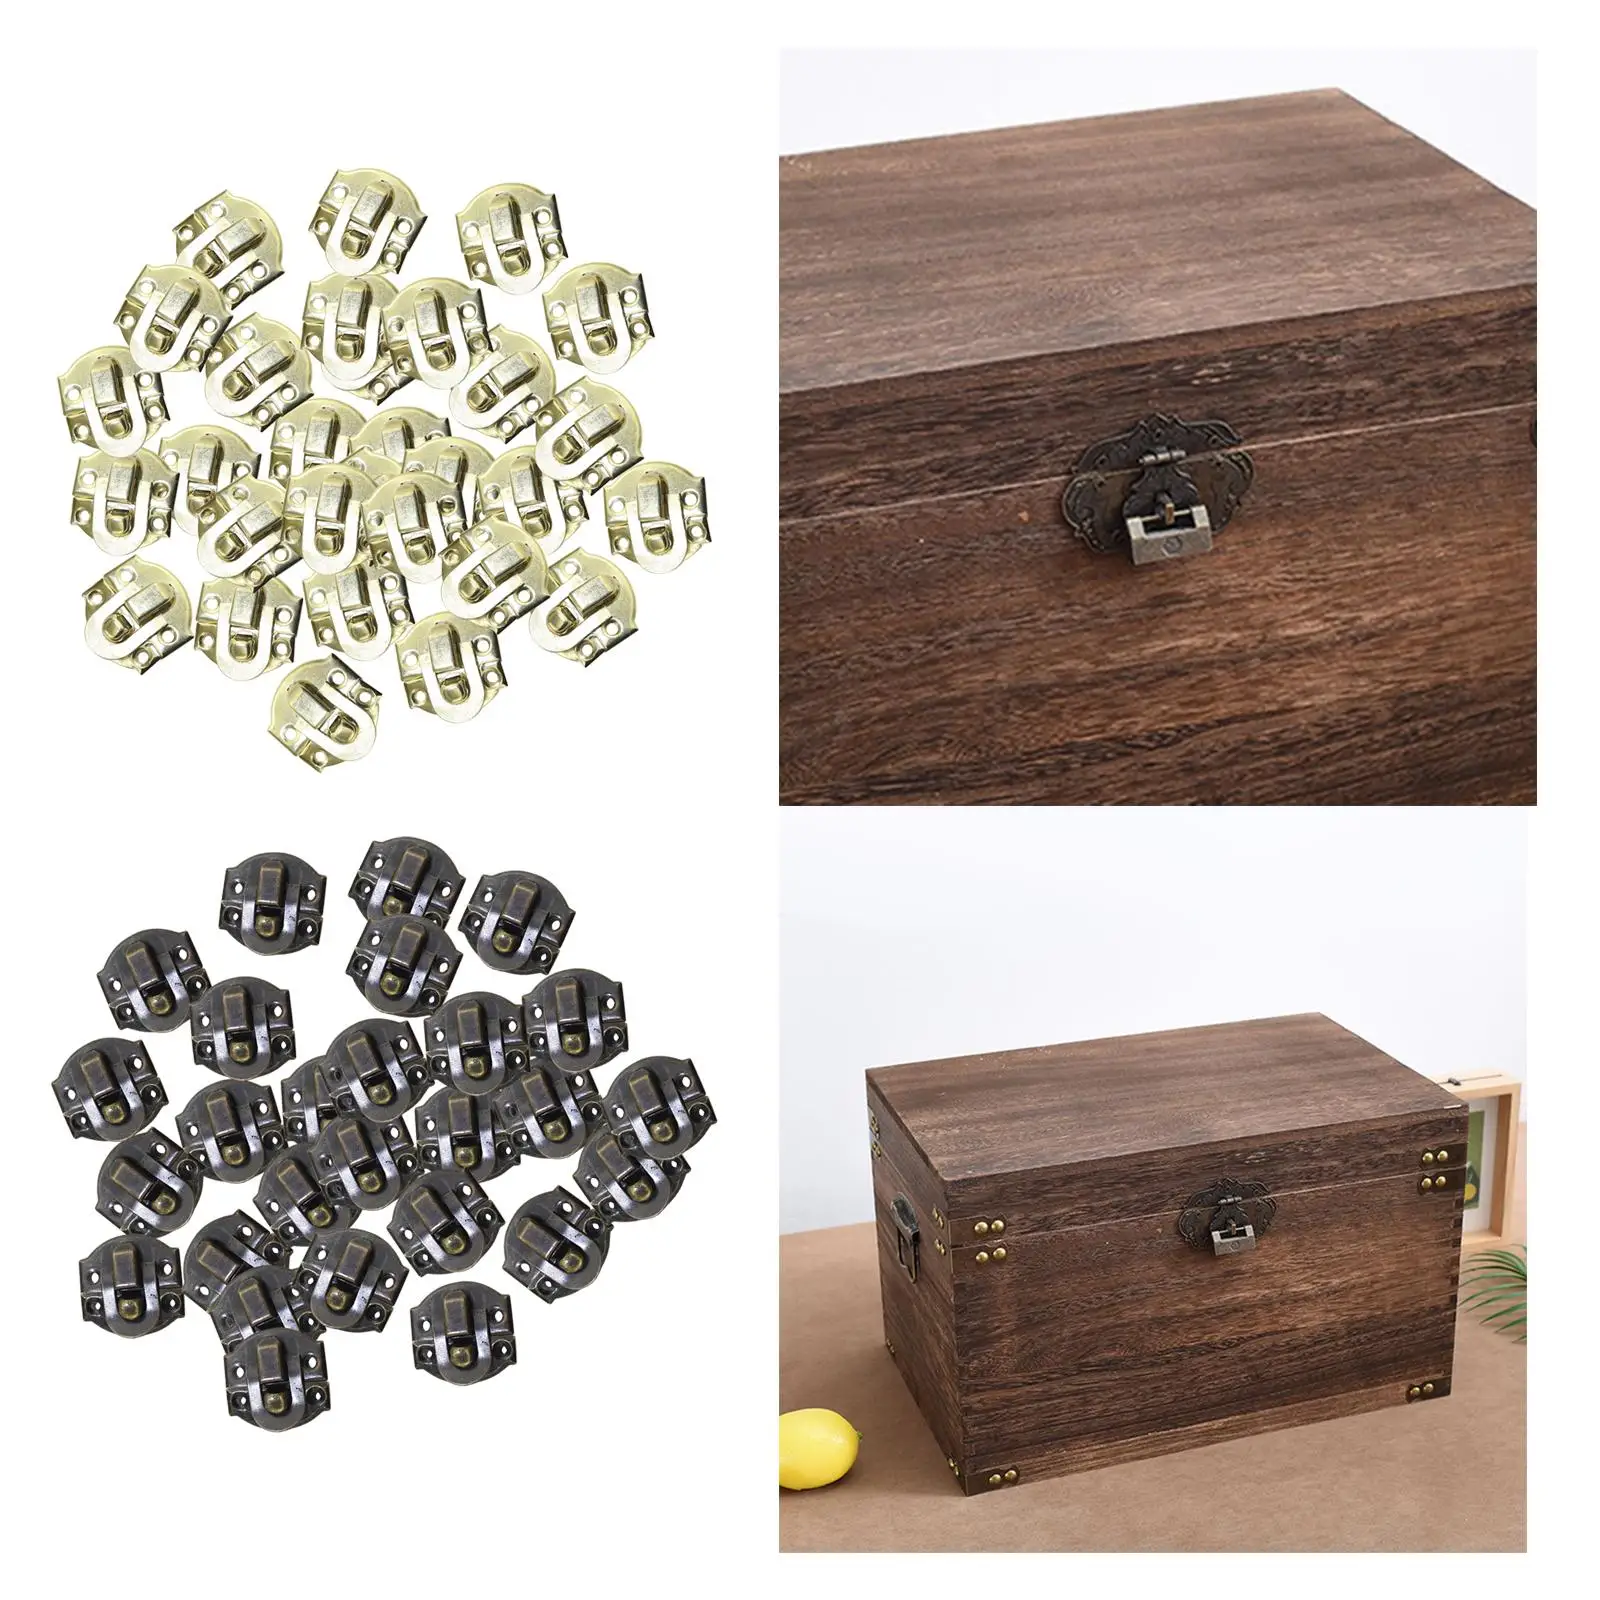 50x Smooth Box Catch latches Hasp Locks Padlock Retro Style Decoration Buckles for Jewelry Boxes Cabinet Furniture Drawer